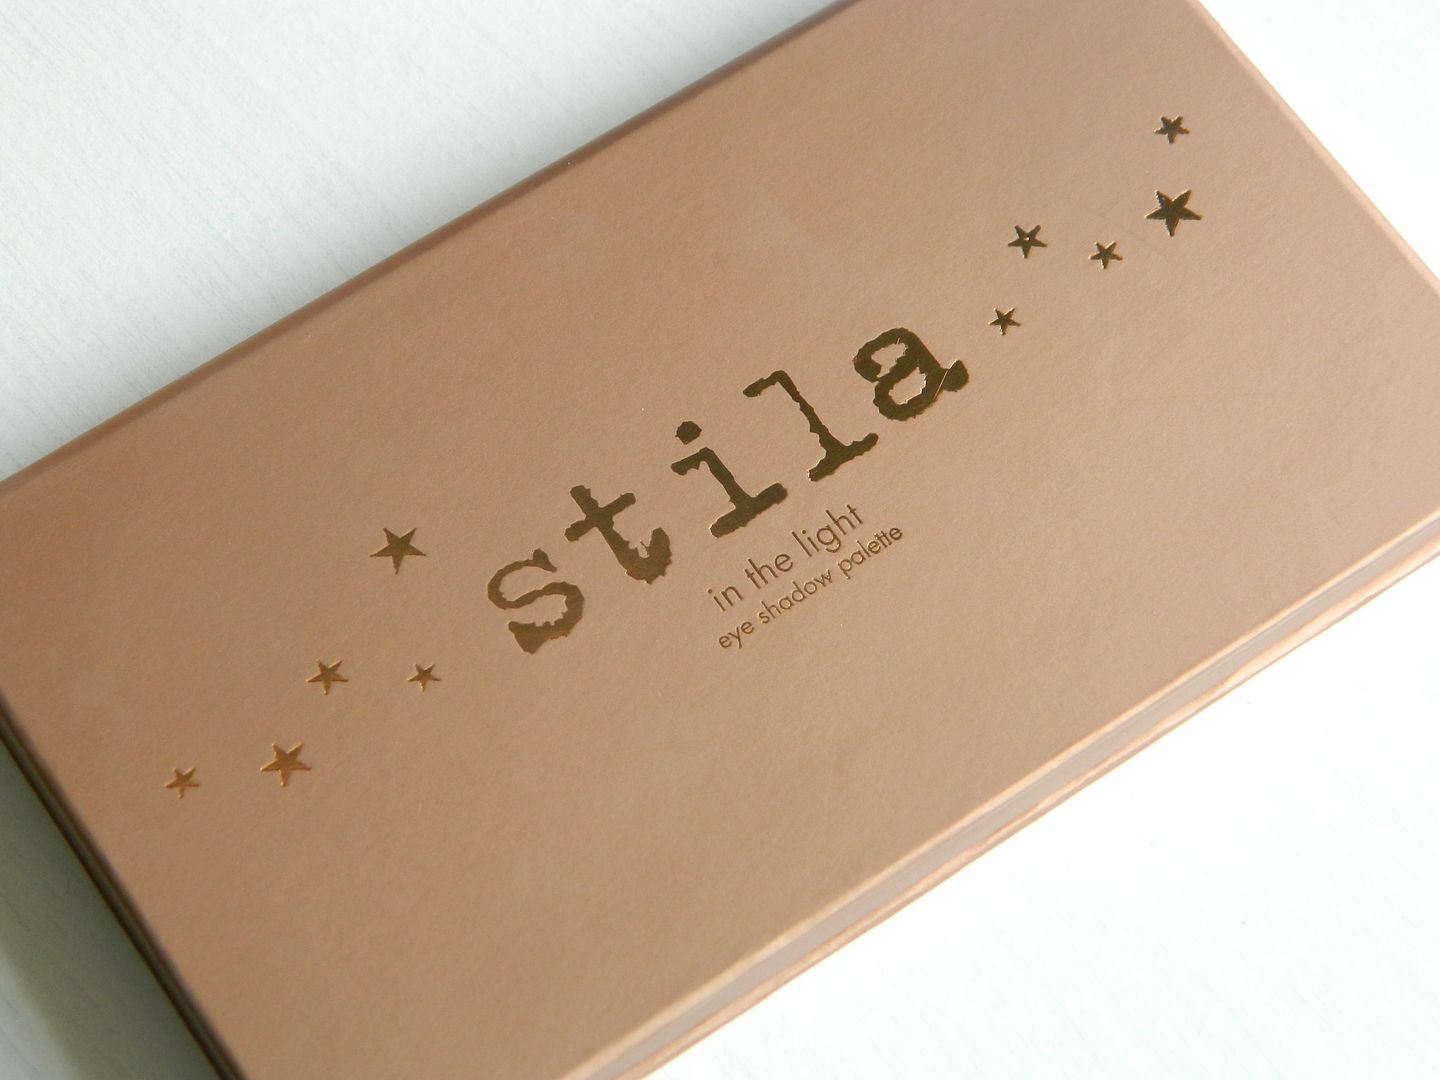 Stila In The Light Eye Shadow palette Packaging Review Belle-amie UK Beauty Fashion Lifestyle Blog